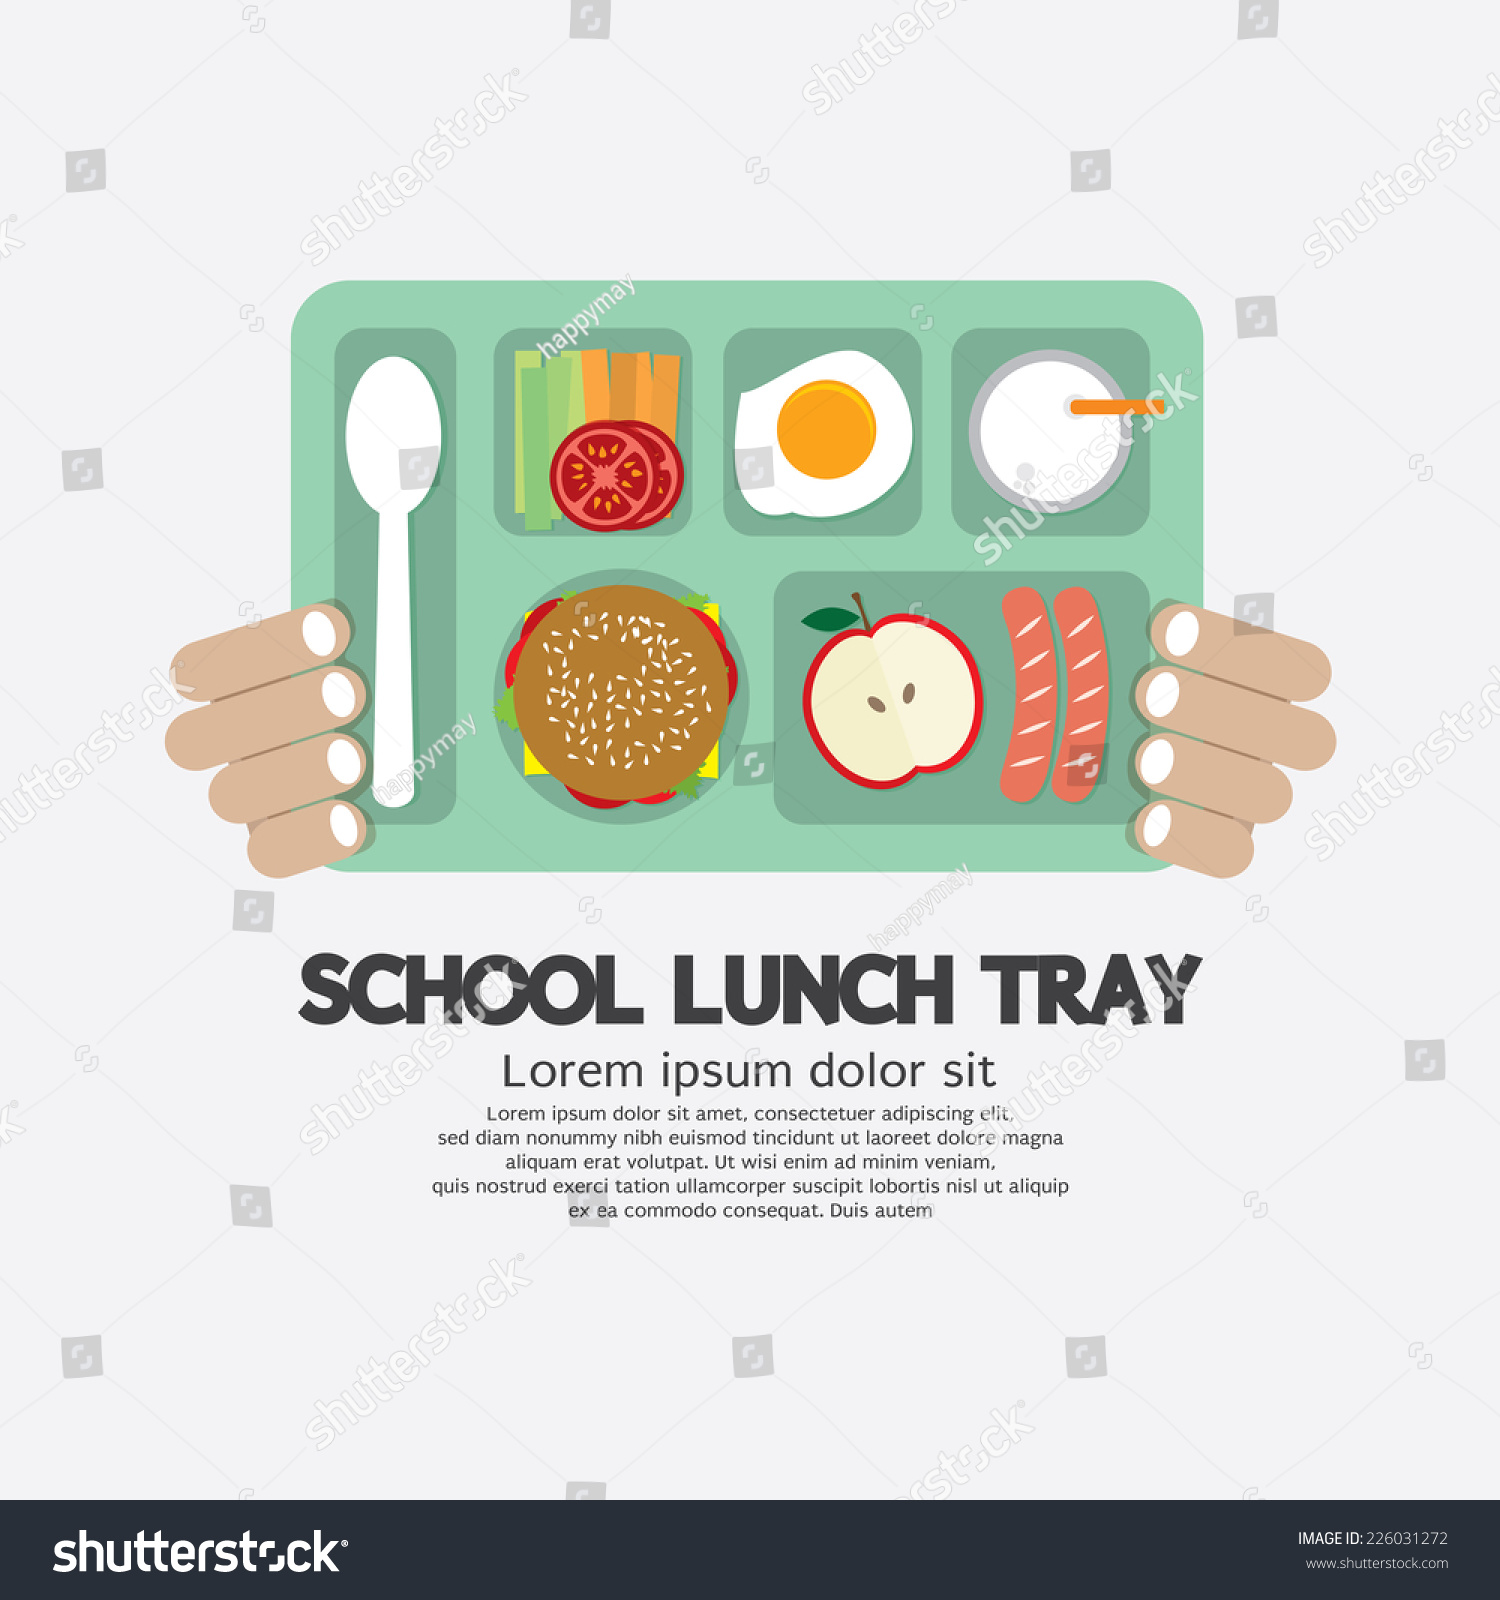 free clipart school lunch tray - photo #49